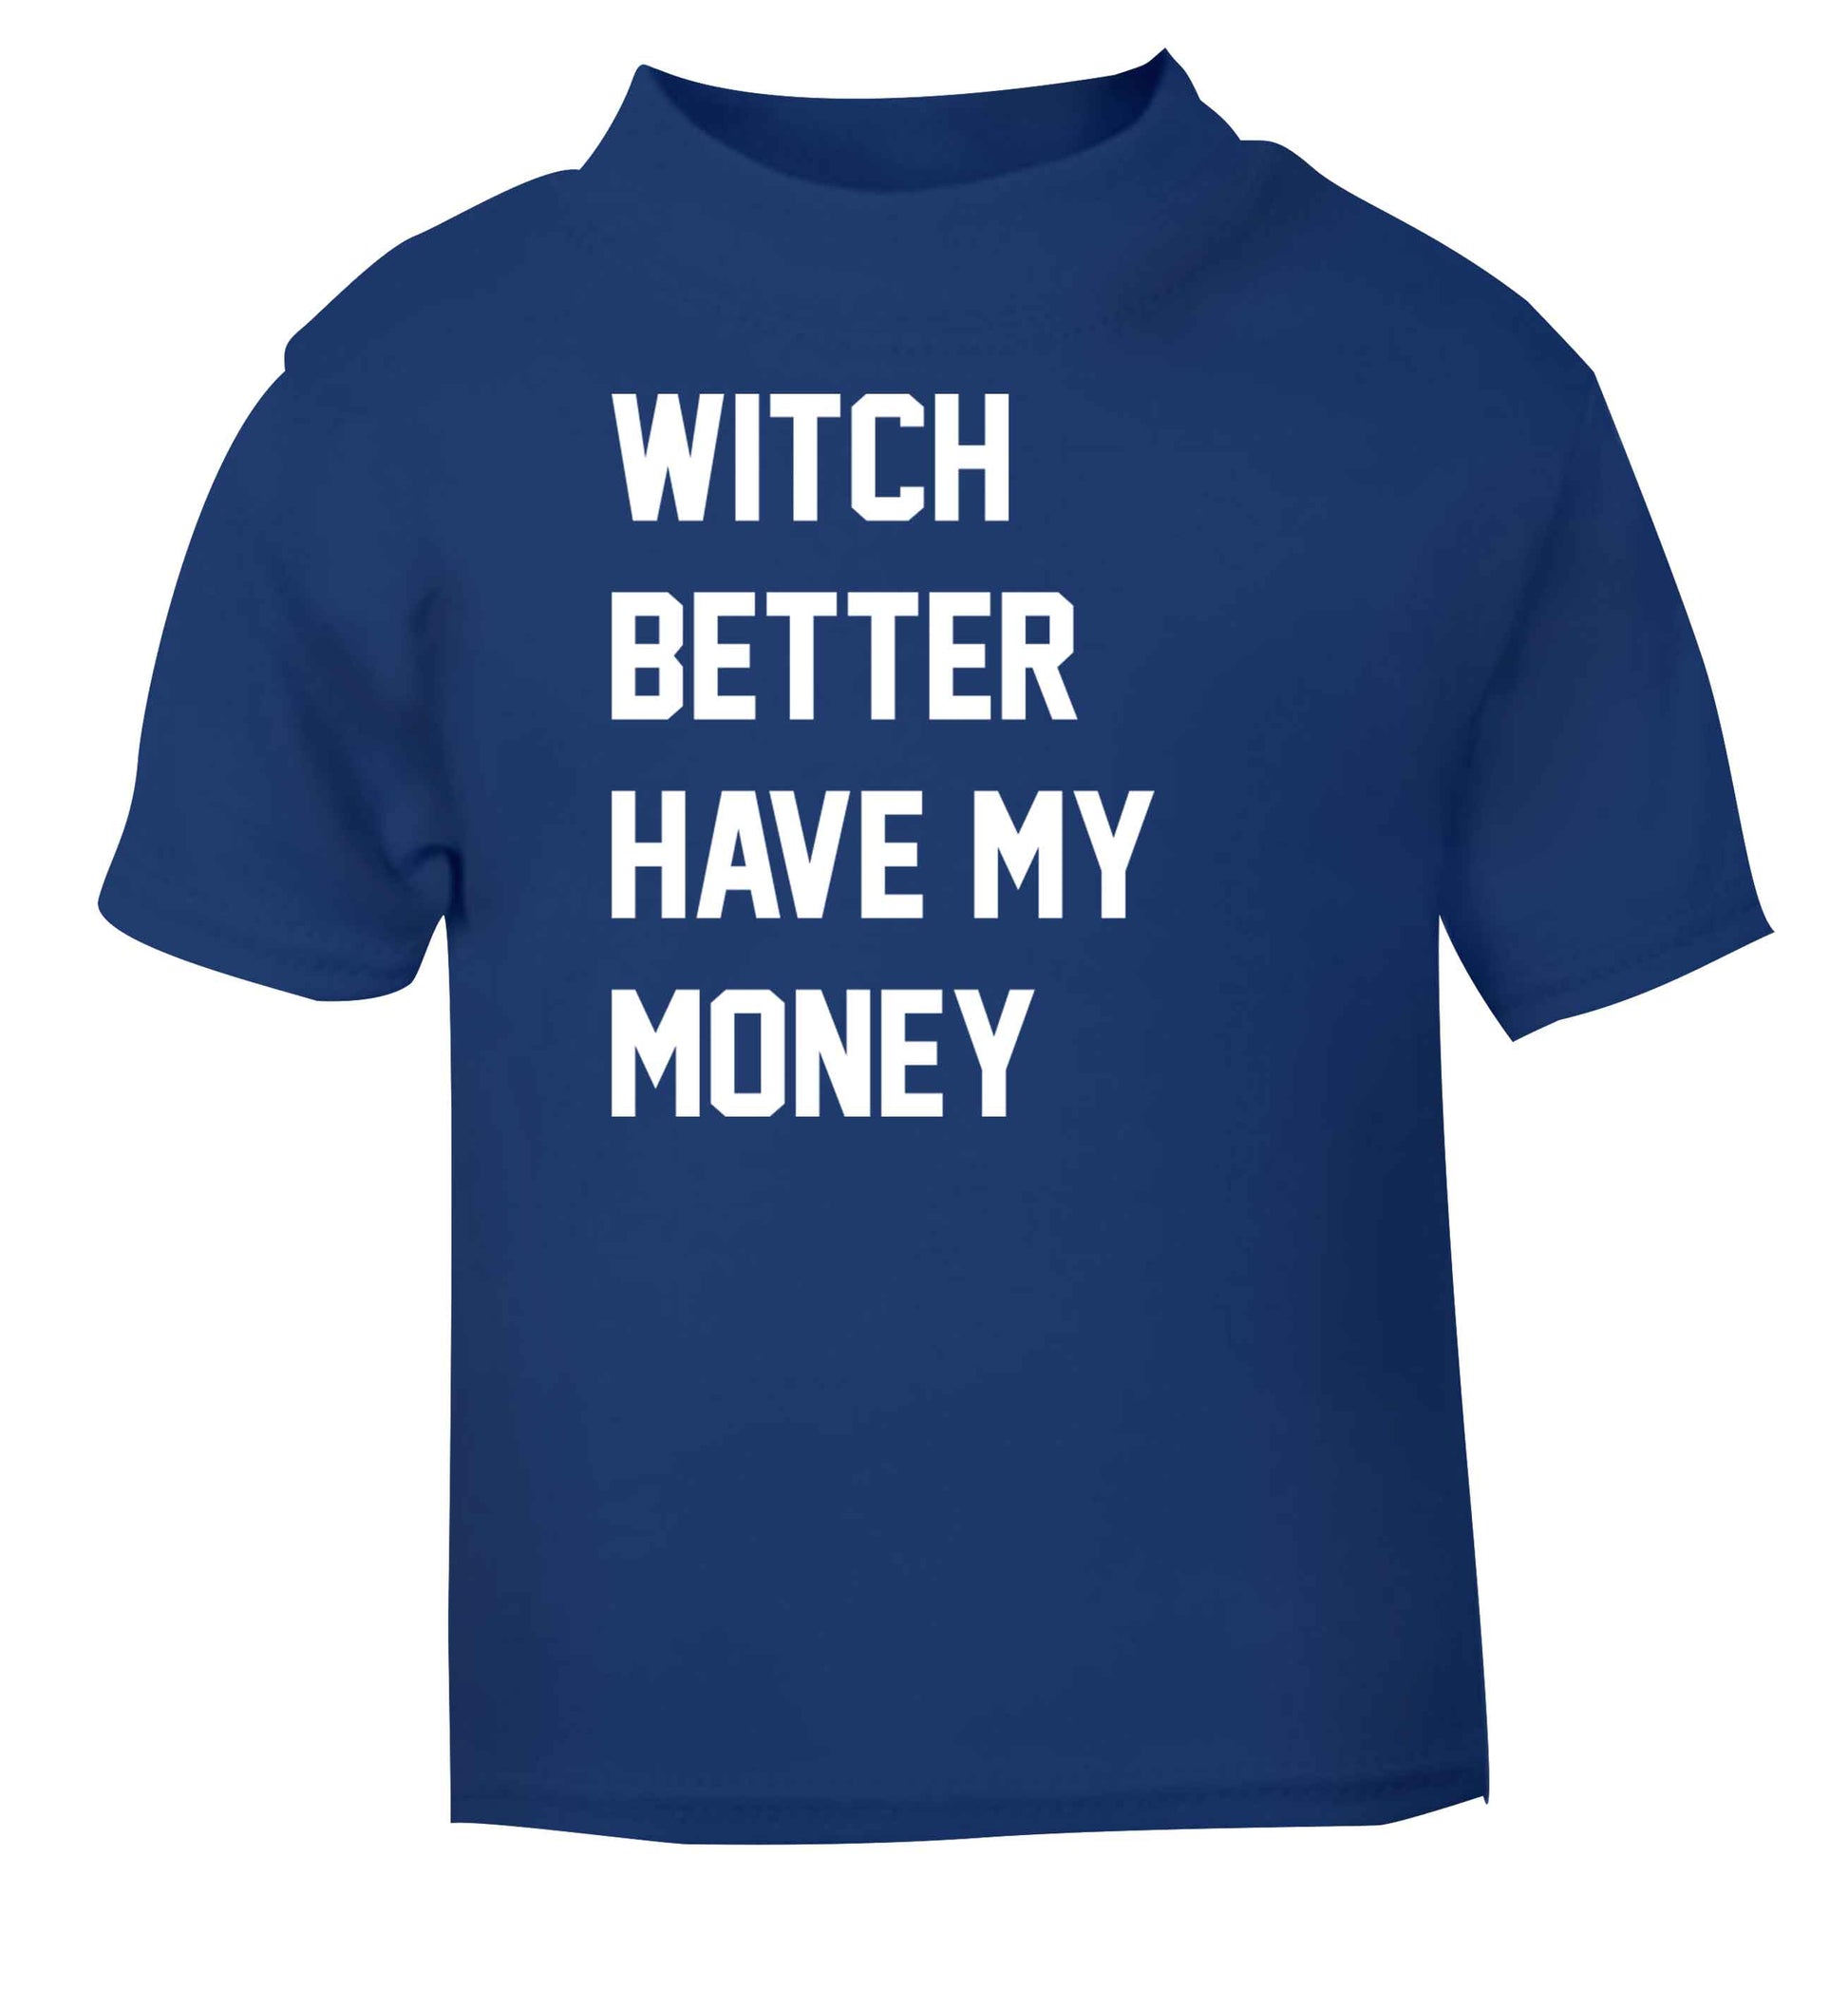 Witch better have my money blue baby toddler Tshirt 2 Years